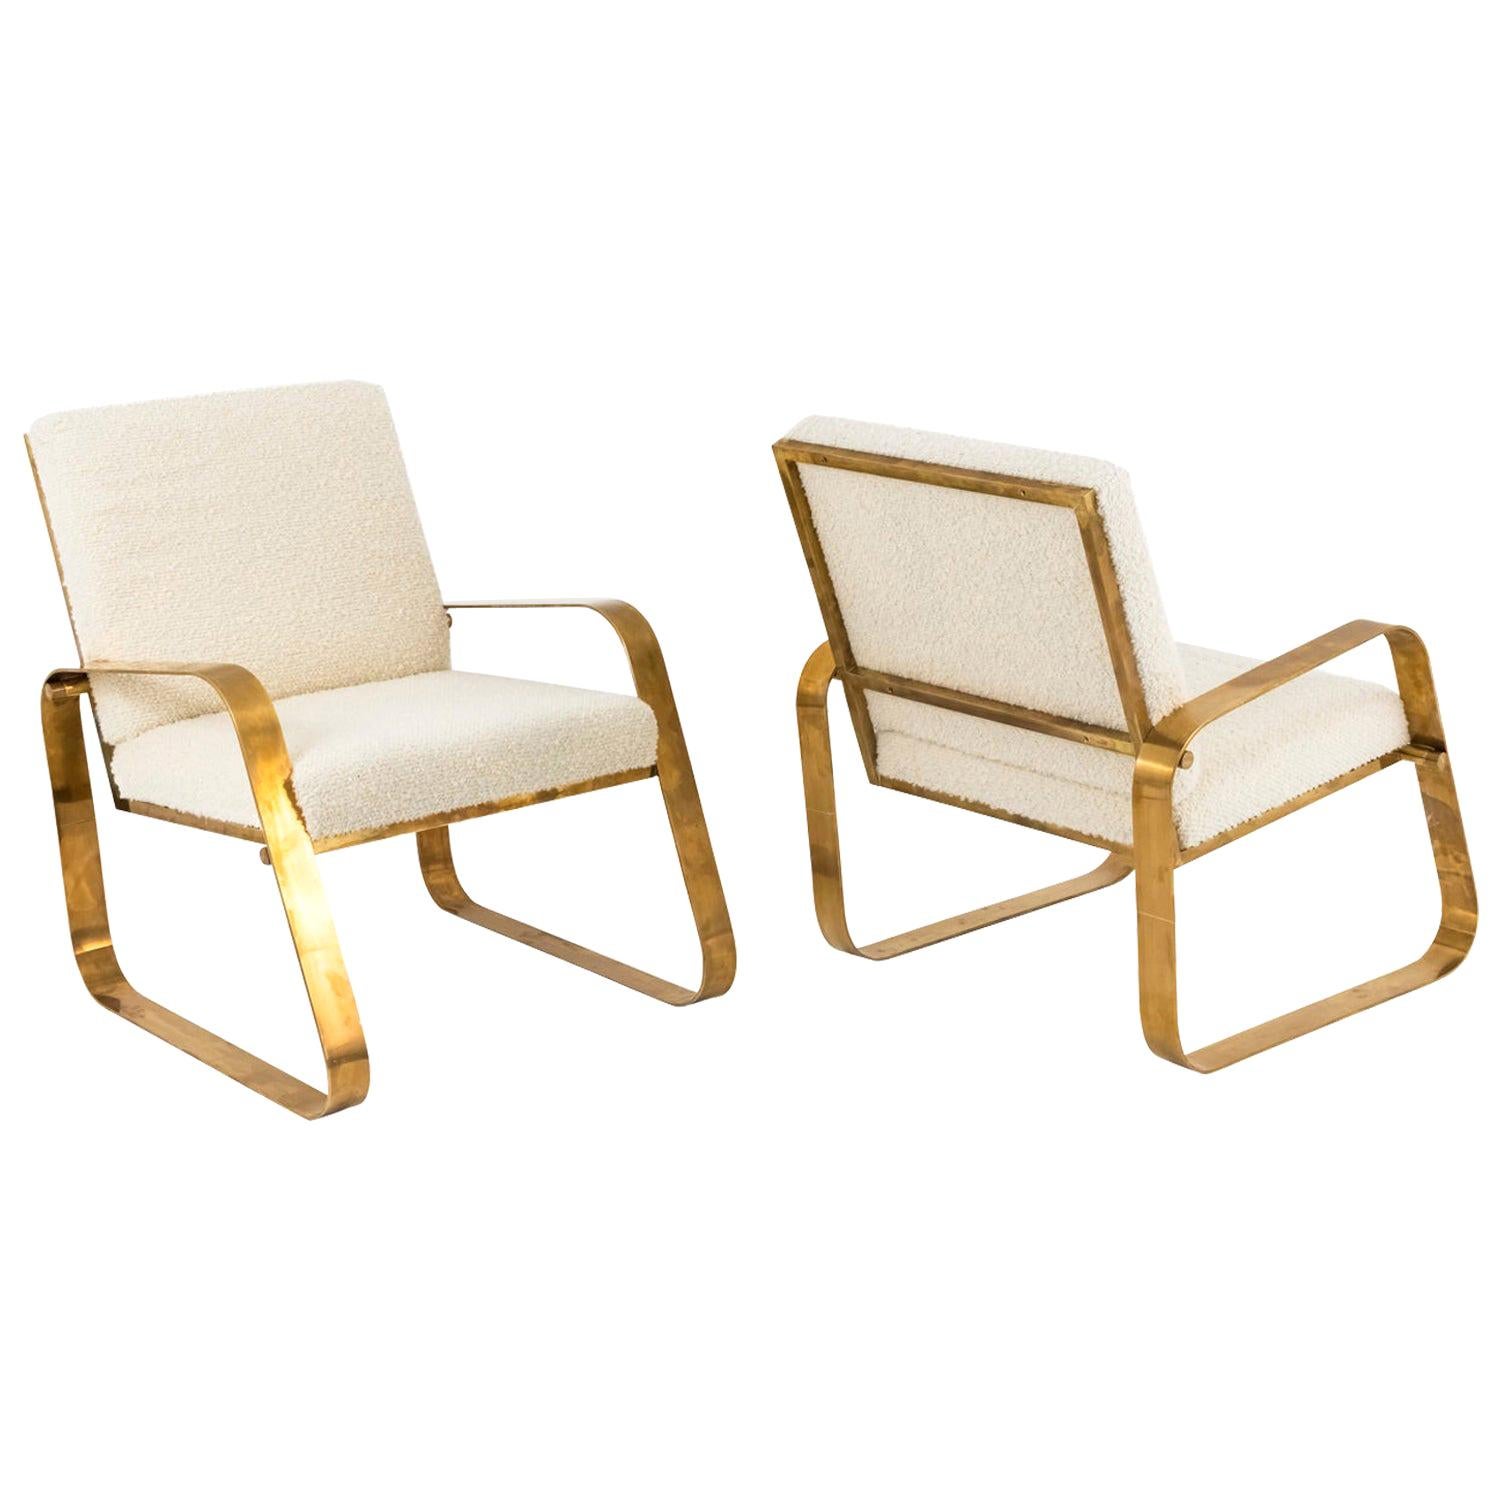 Pair of Modern Easy Chairs in Gilt Brushed Brass, Contemporary Work